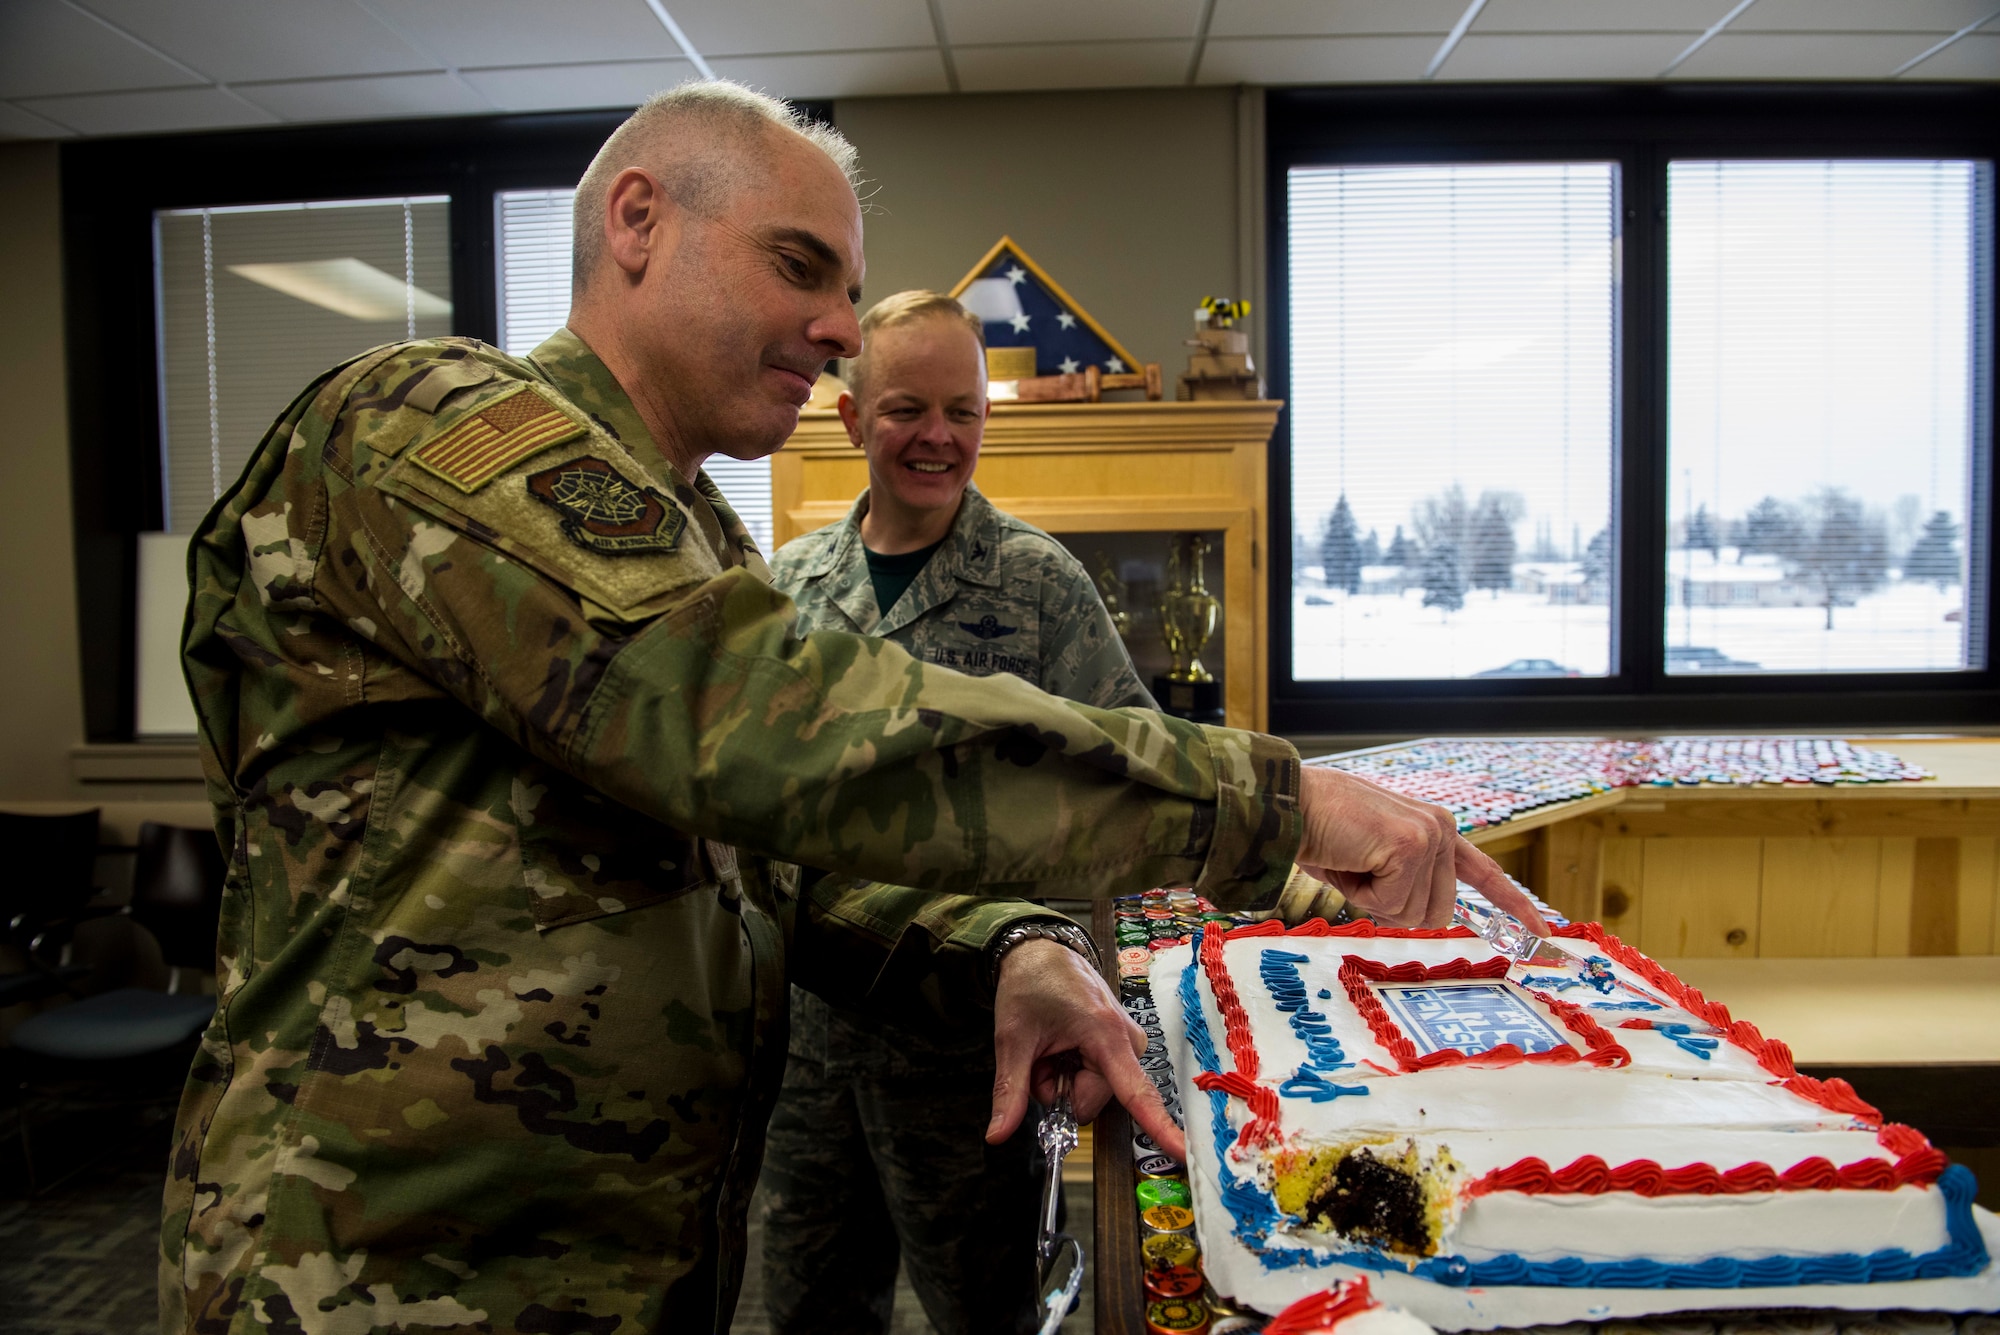 Col. Ronald Merchant, Air Mobility Command medical support division chief, and Col. Derek Salmi, 92nd Air Refueling Wing commander, cut a cke in celebration for the second year anniversary of Military Health System Genesis' arrival to the 92nd Medical Group at Fairchild Air Force Base, Washington, Feb. 8, 2019.  Fairchild was selected to be the pilot base for the Genesis due to its location, patient load, a record of excellence and enthusiasm to take on the project. (U.S. Air Force photo/Airman 1st Class Lawrence Sena)